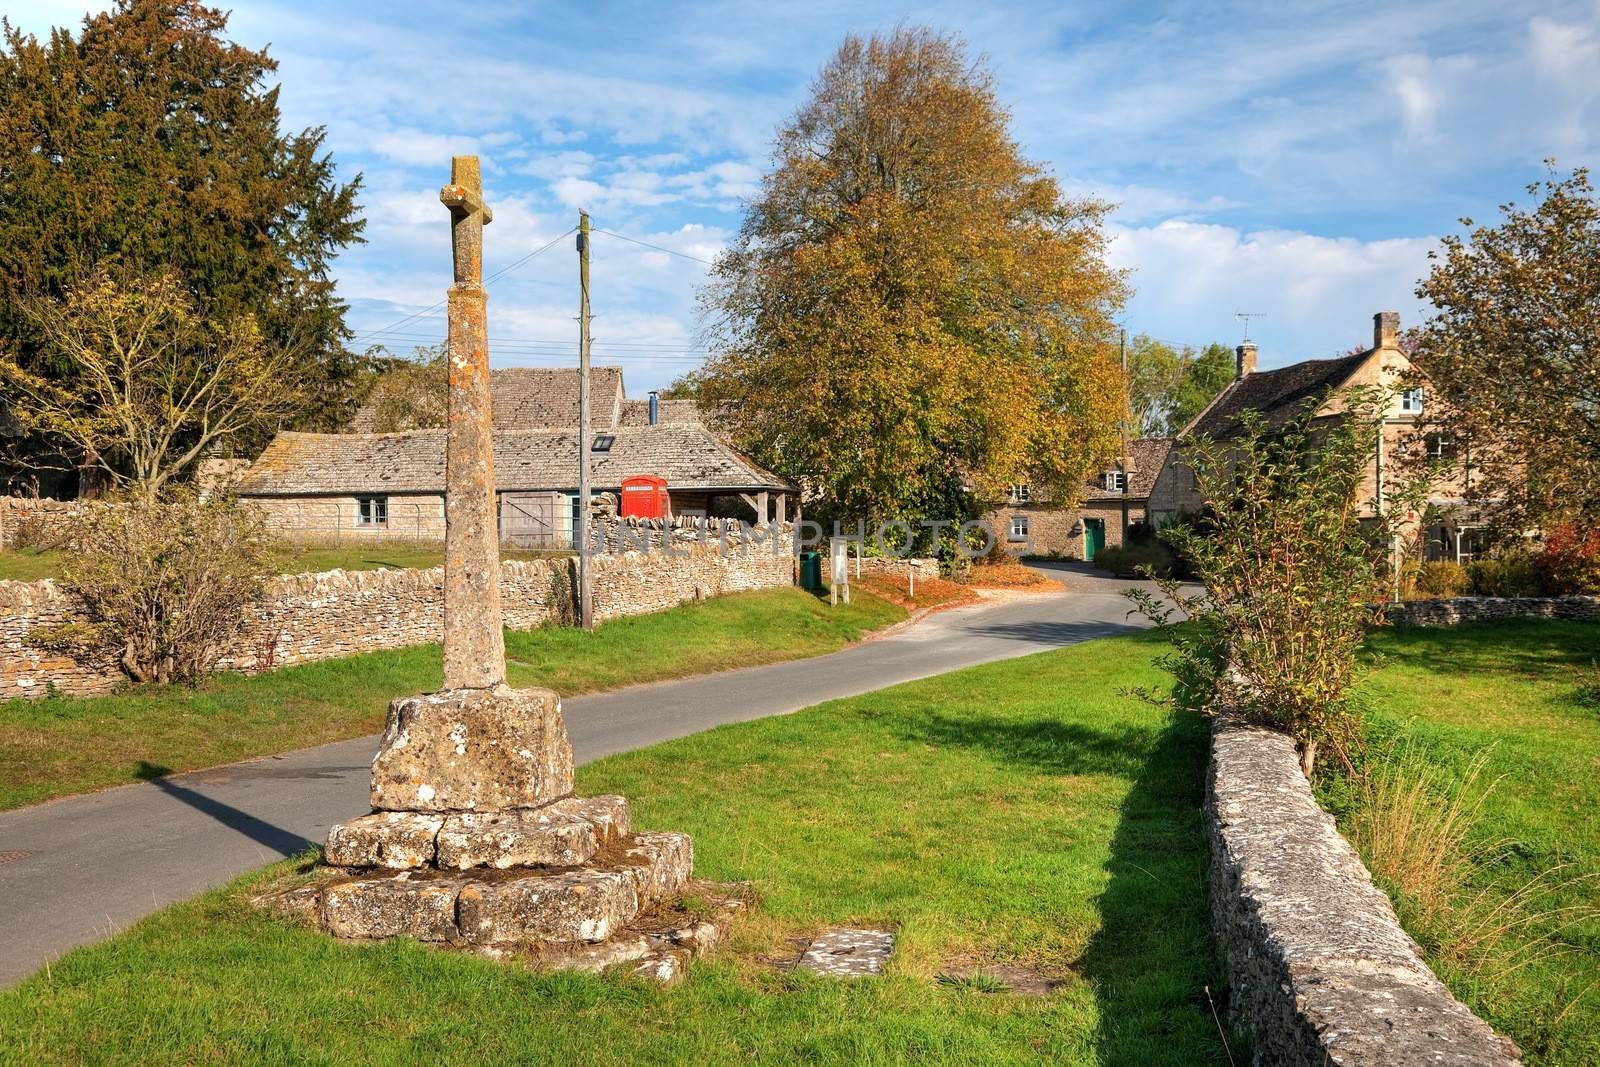 The old stone cross at Condicote, Gloucestershire, England.